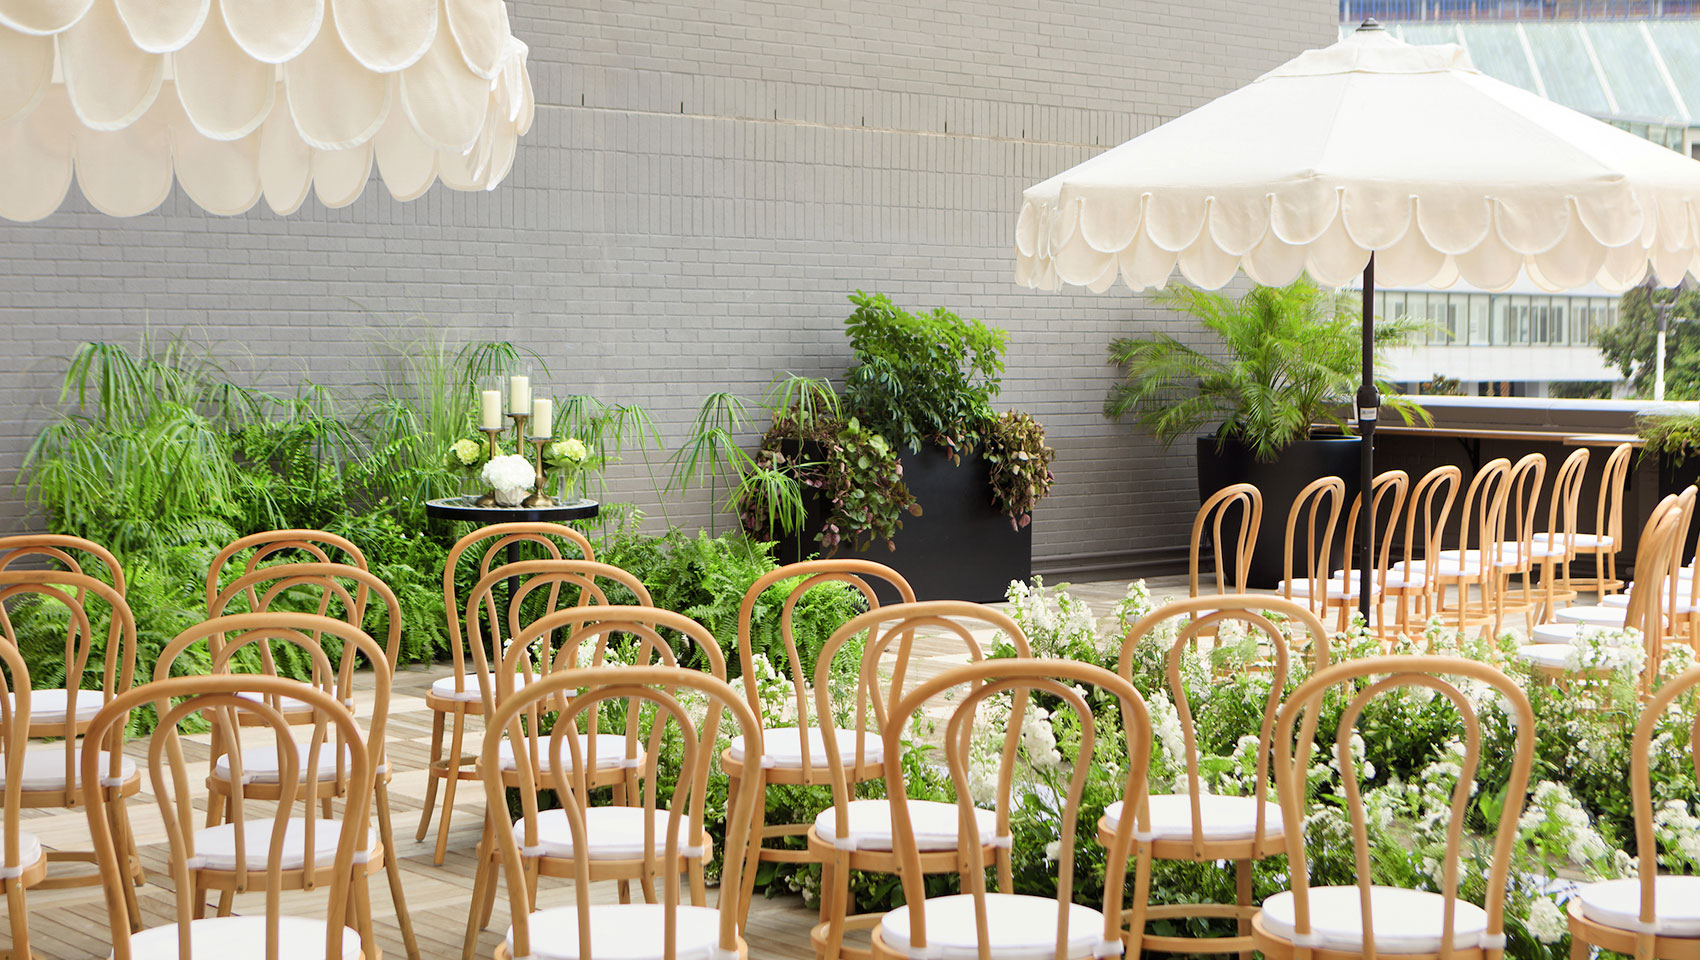 Rooftop wedding ceremony set up with rattan chairs, white florals and white